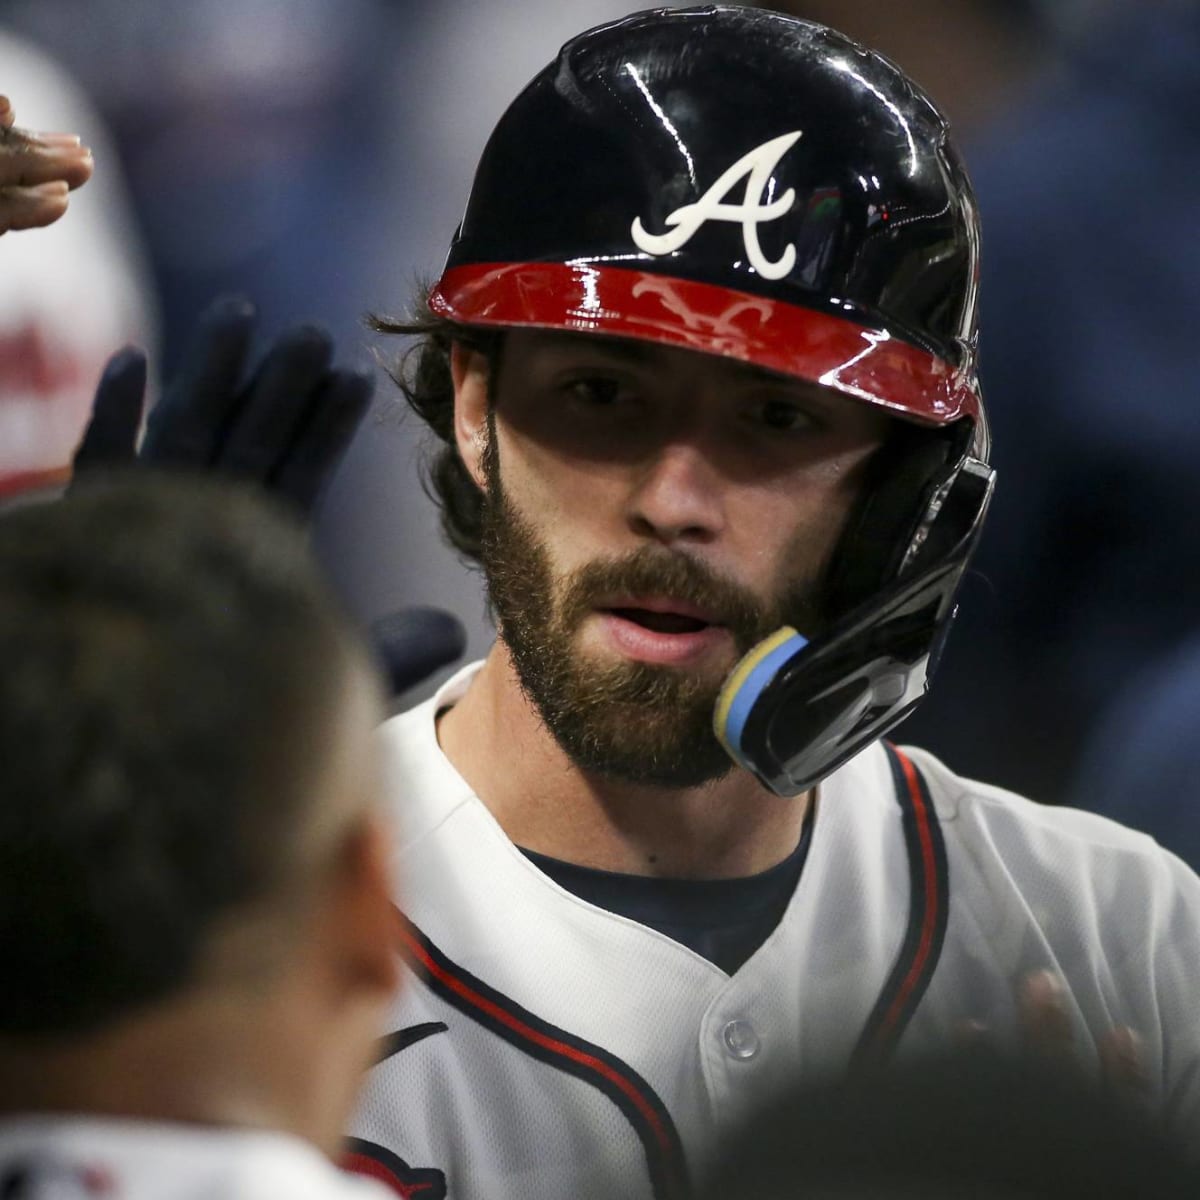 Dansby Swanson, Cubs agree to deal